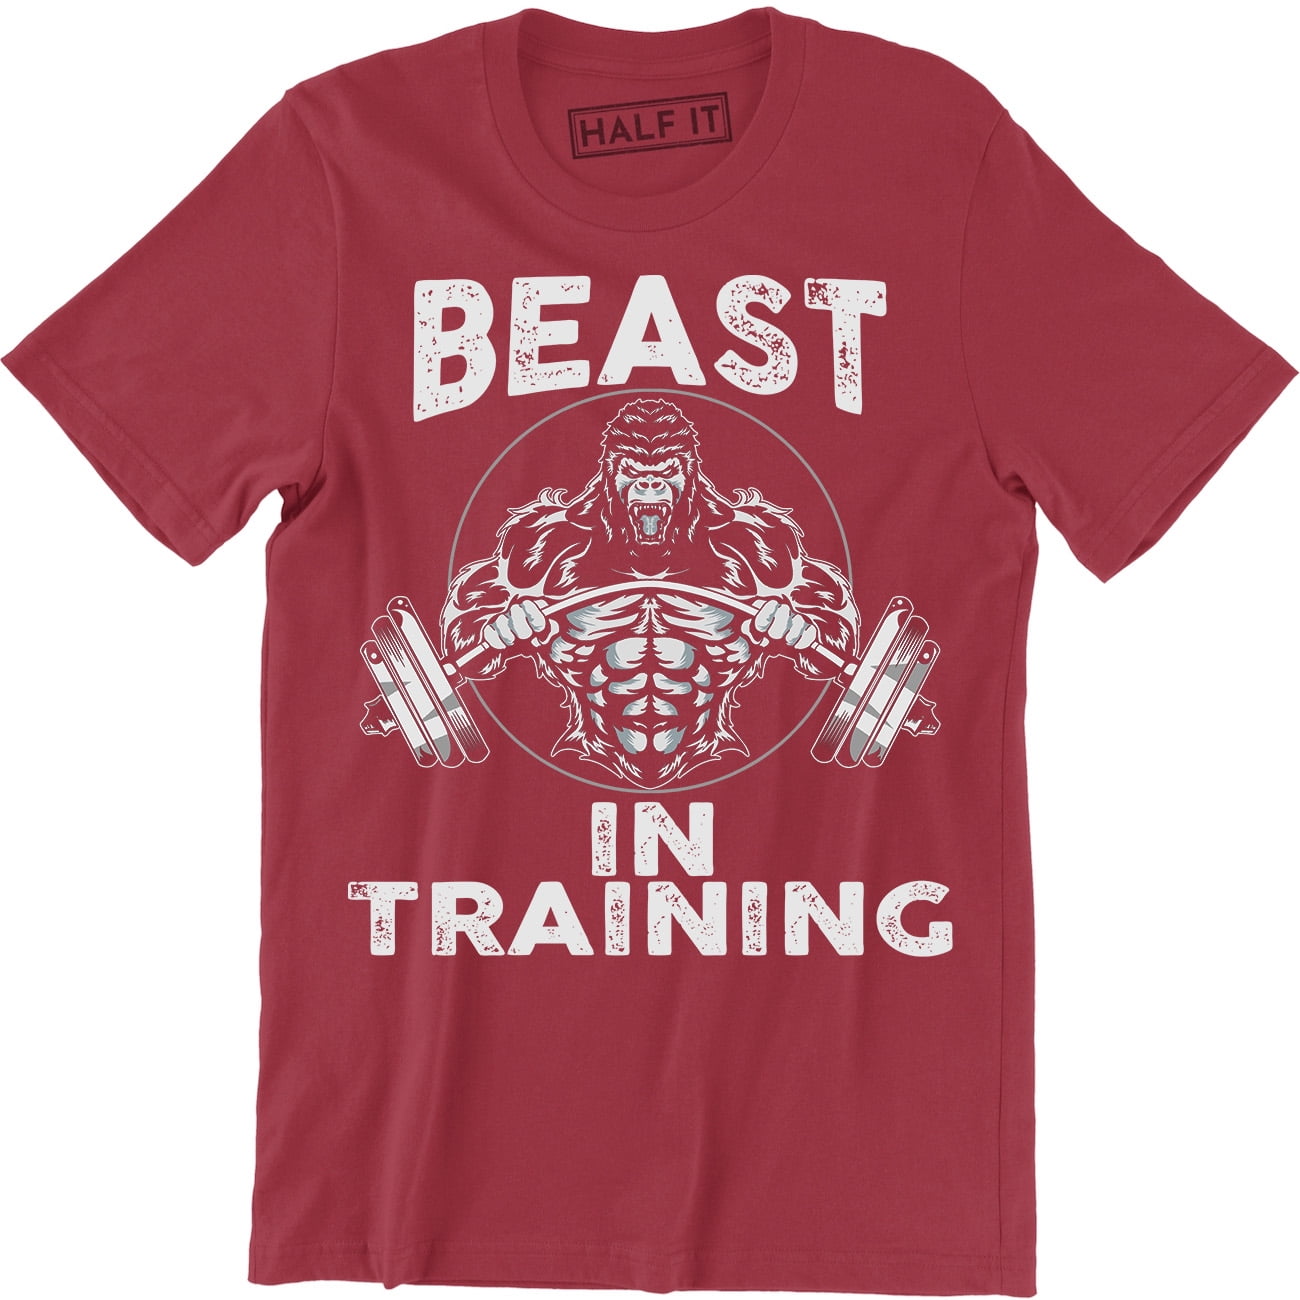 Beast In Trainning - Chimpanzee Funny Gym Workout Fitness Men's T-Shirt ...